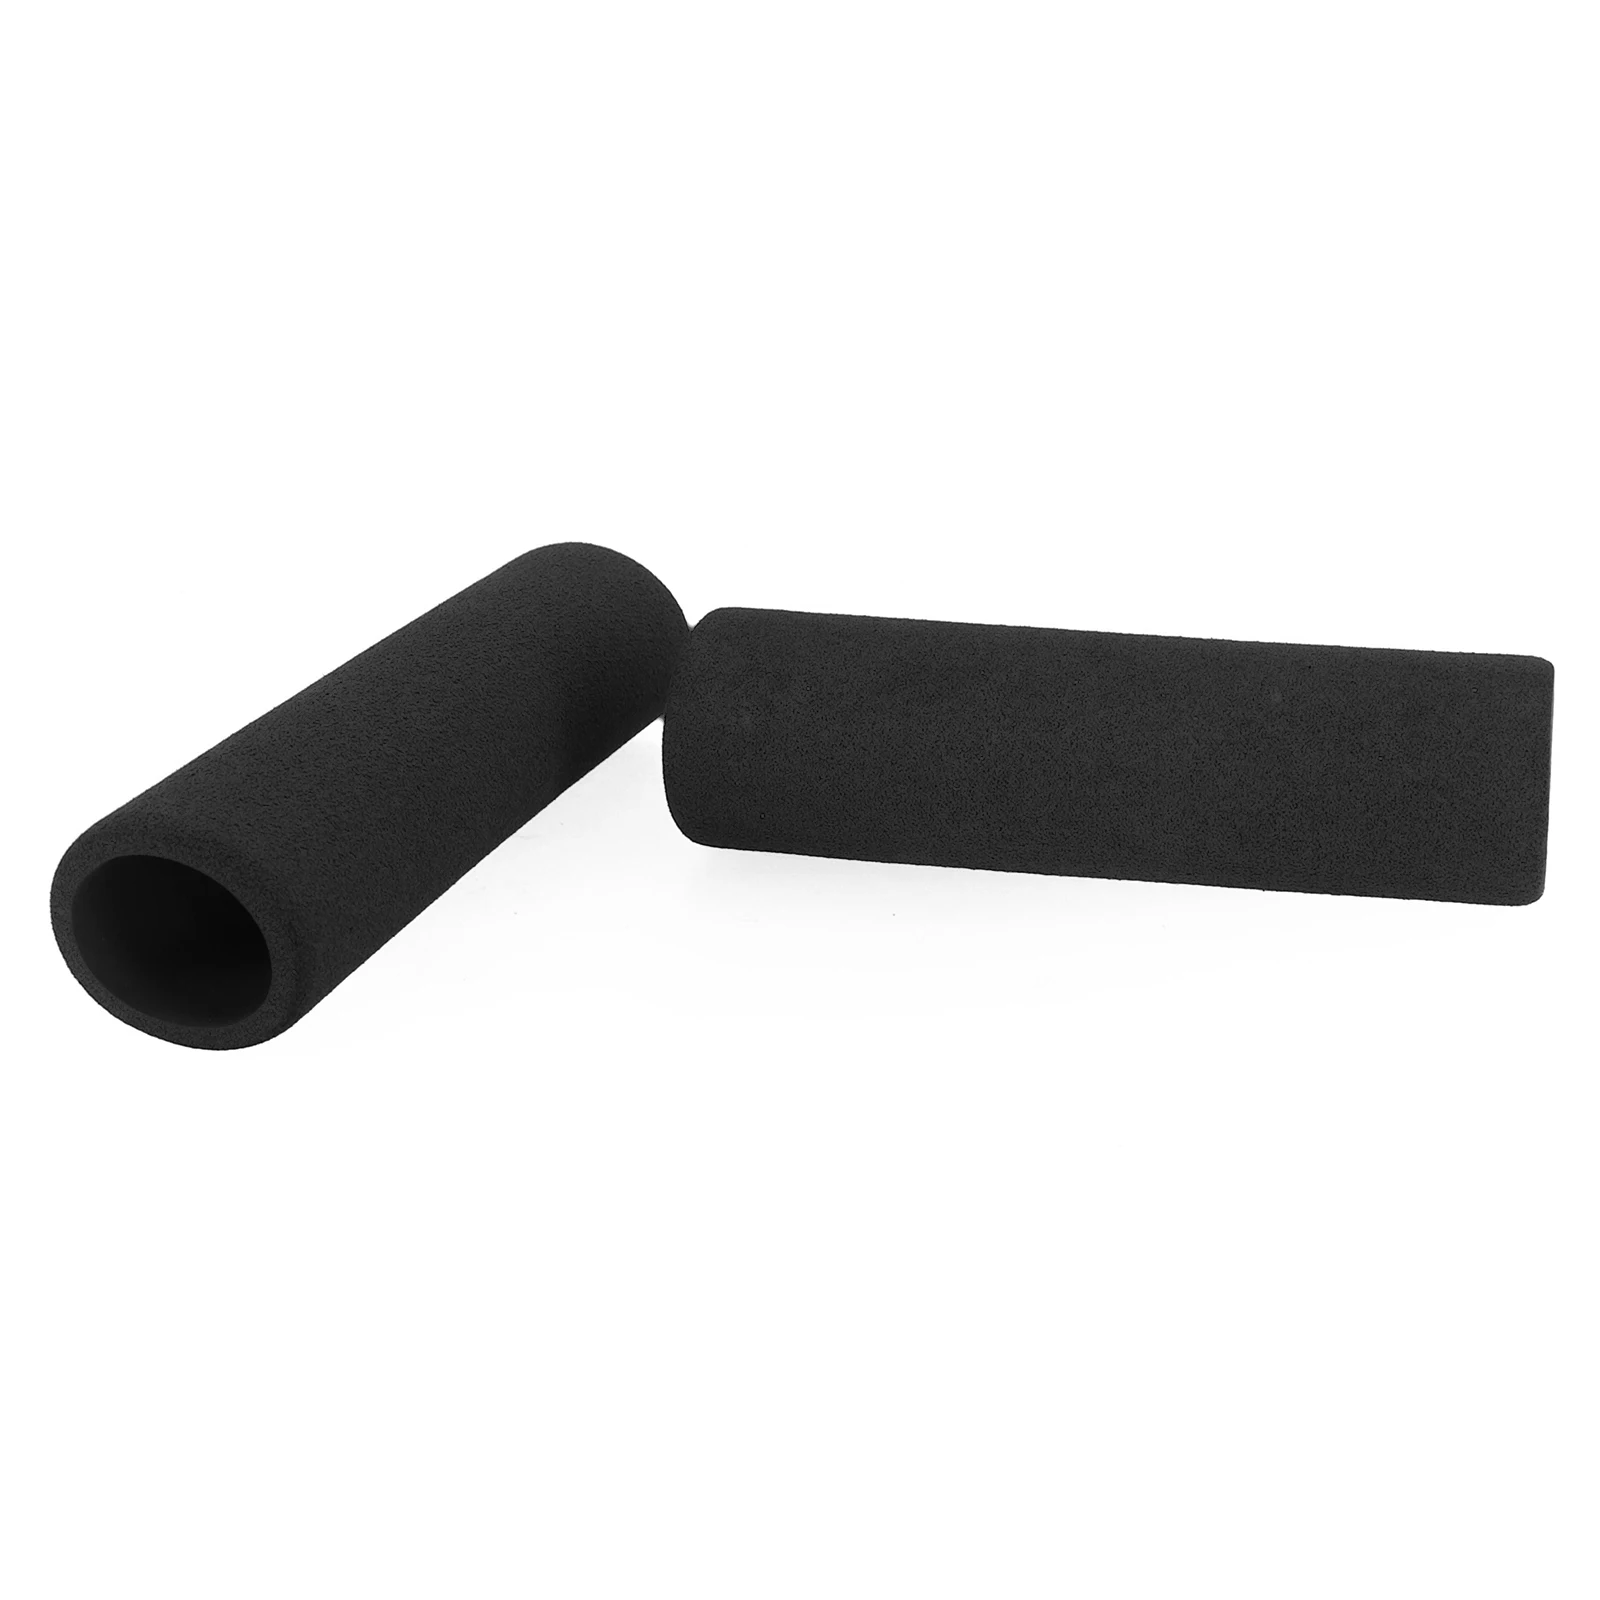 

2pcs Grip Covers 4.72 Inches 4MM Accessories Anti Vibration Brand New Durable High Quality Practical Replacement